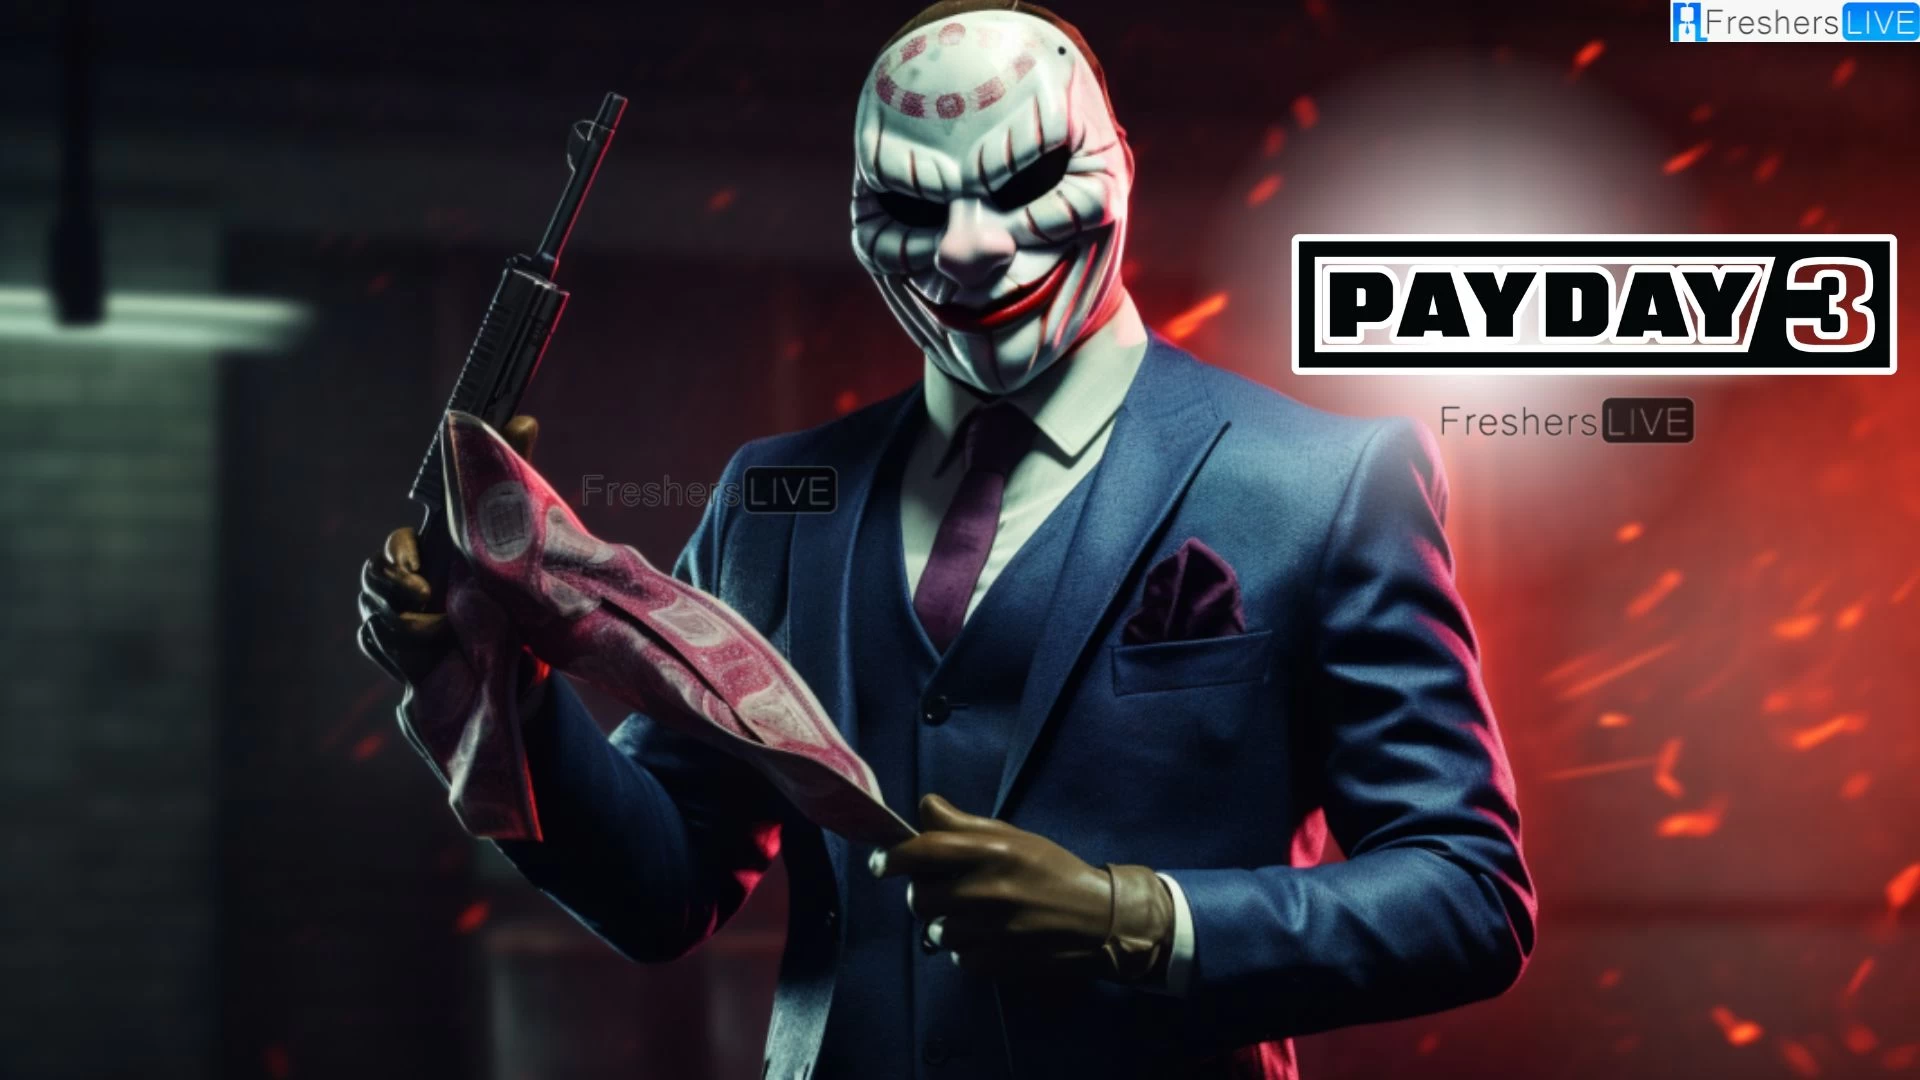 Payday 3 Achievements Not Unlocking, How to Fix Payday 3 Achievements Not Unlocking?